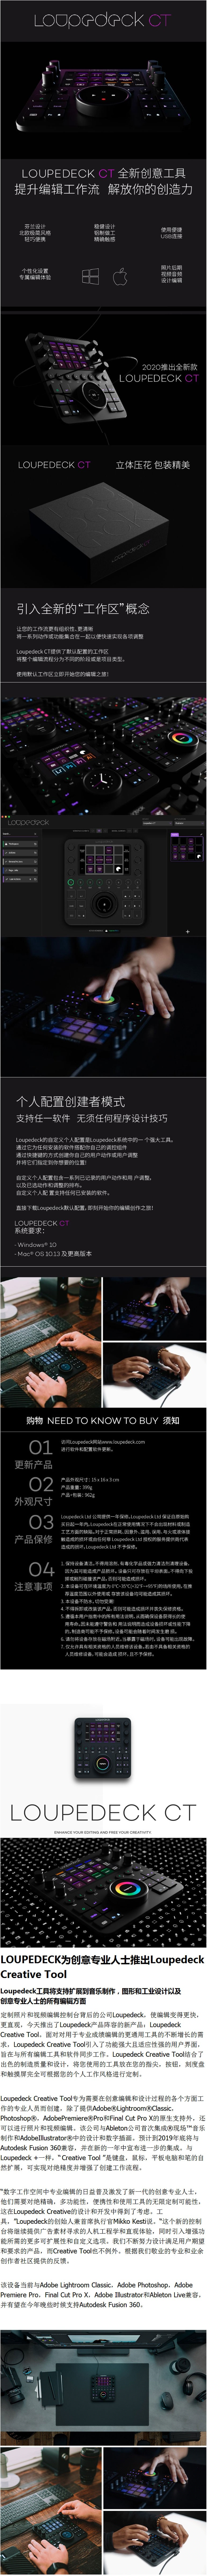 loupedeck-ct.png